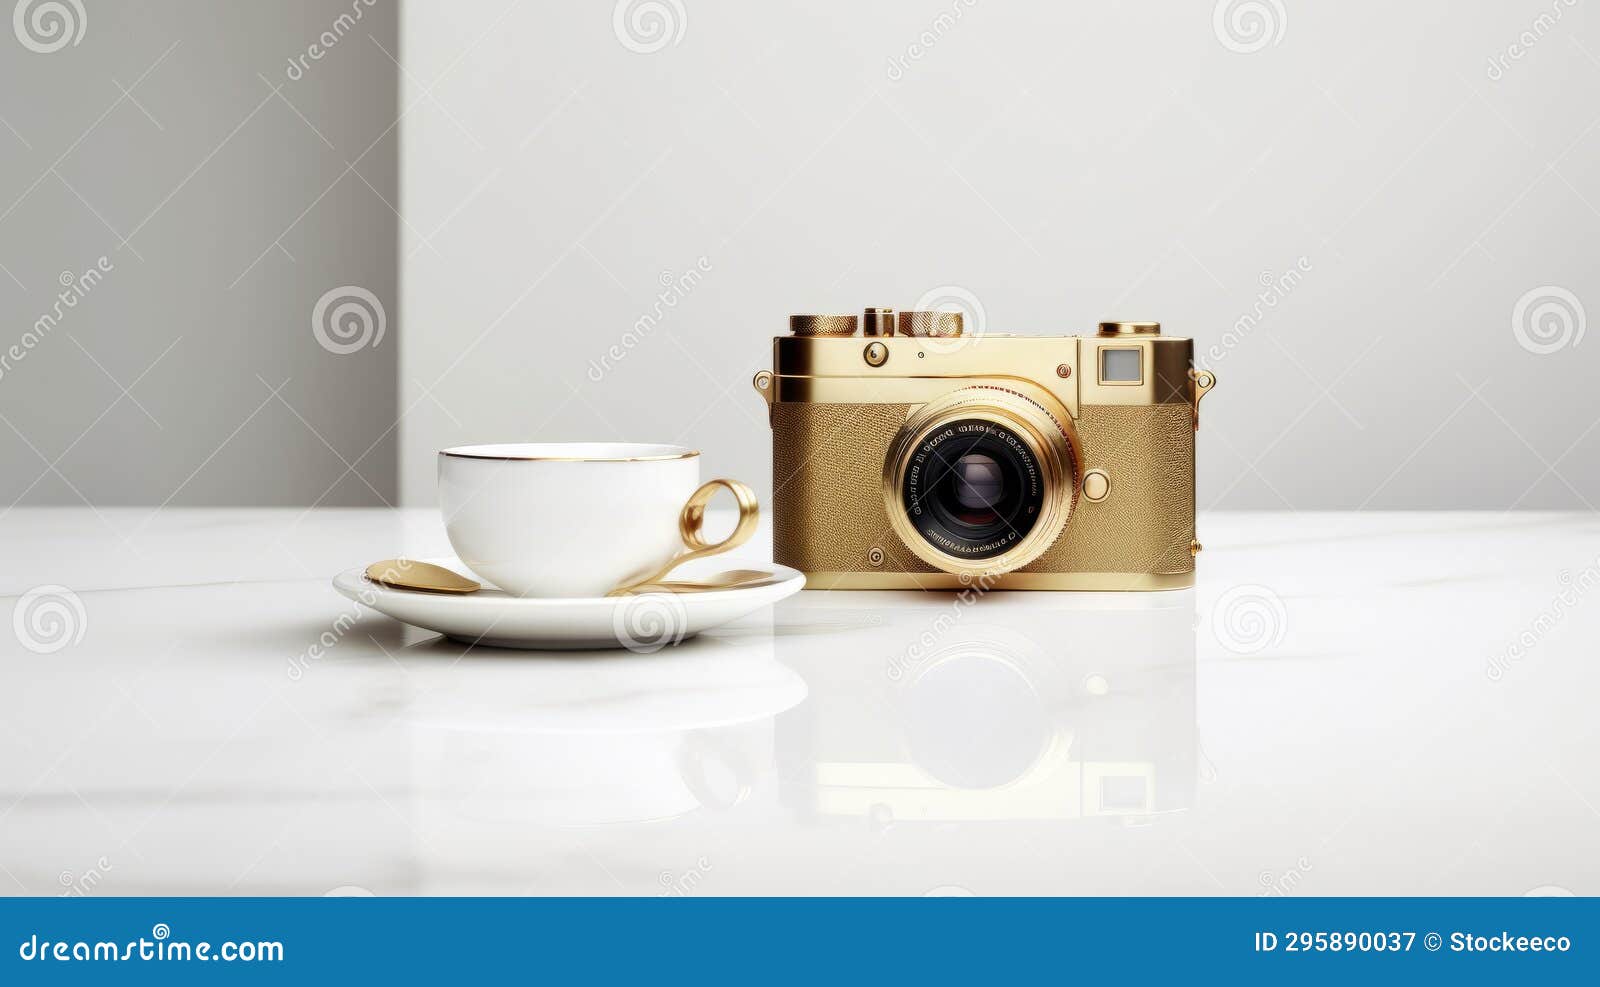 glamorous gold coffee cup with leica camera 